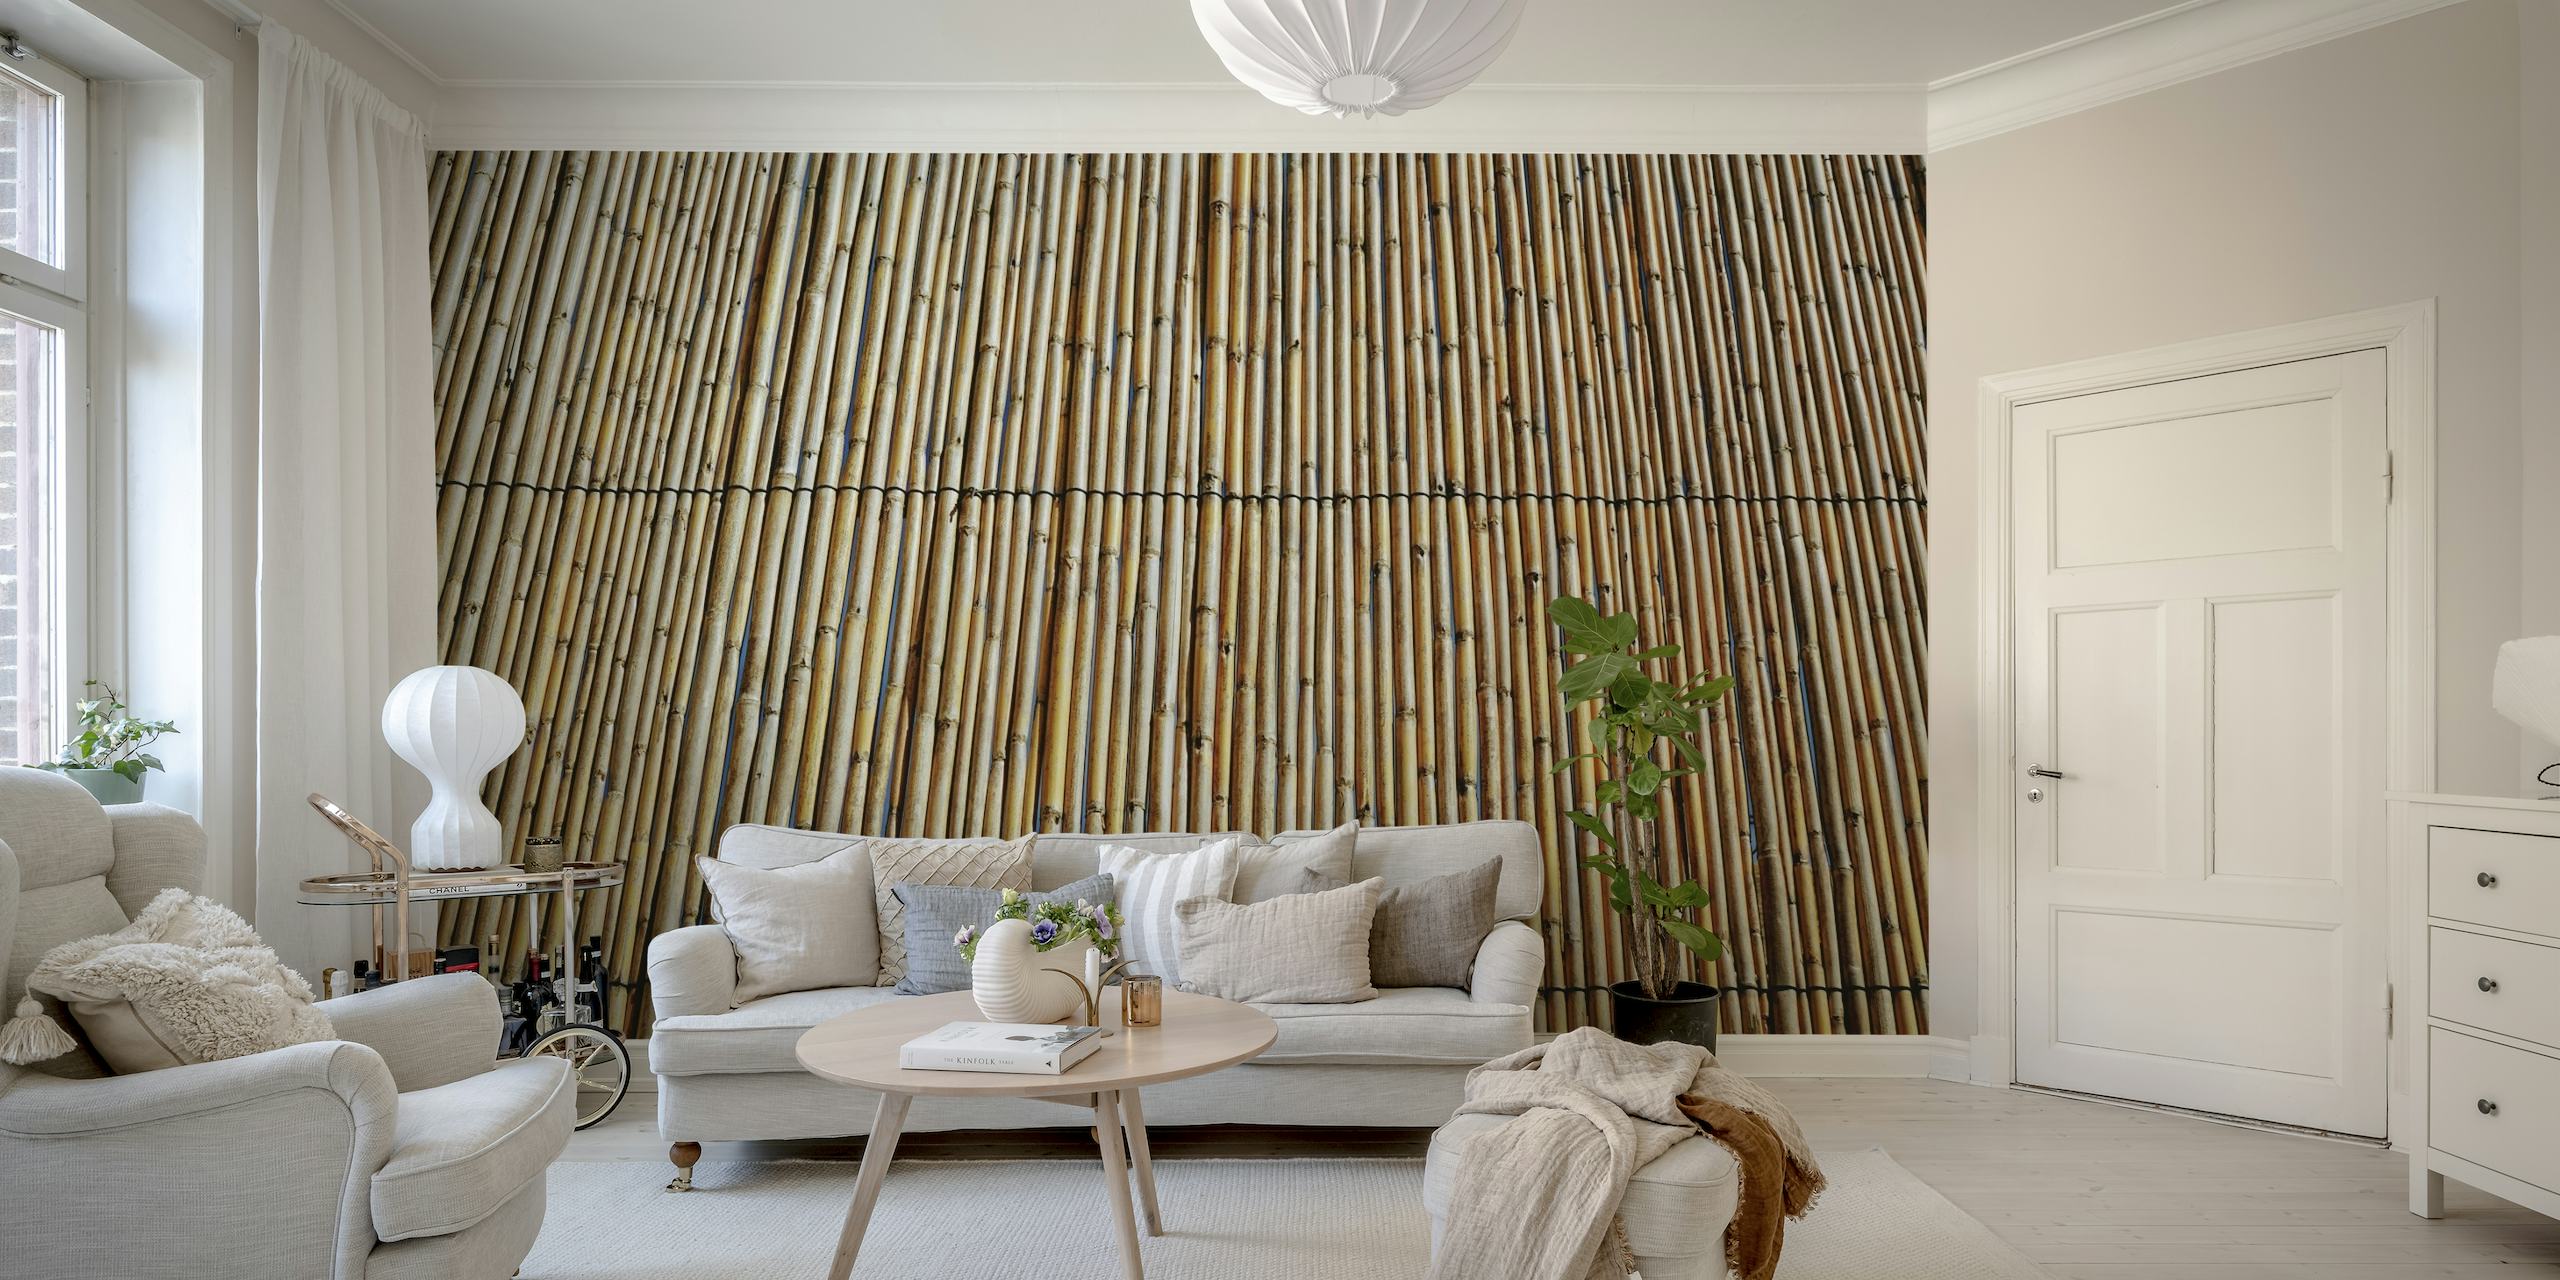 Wooden Bamboo Wall ταπετσαρία